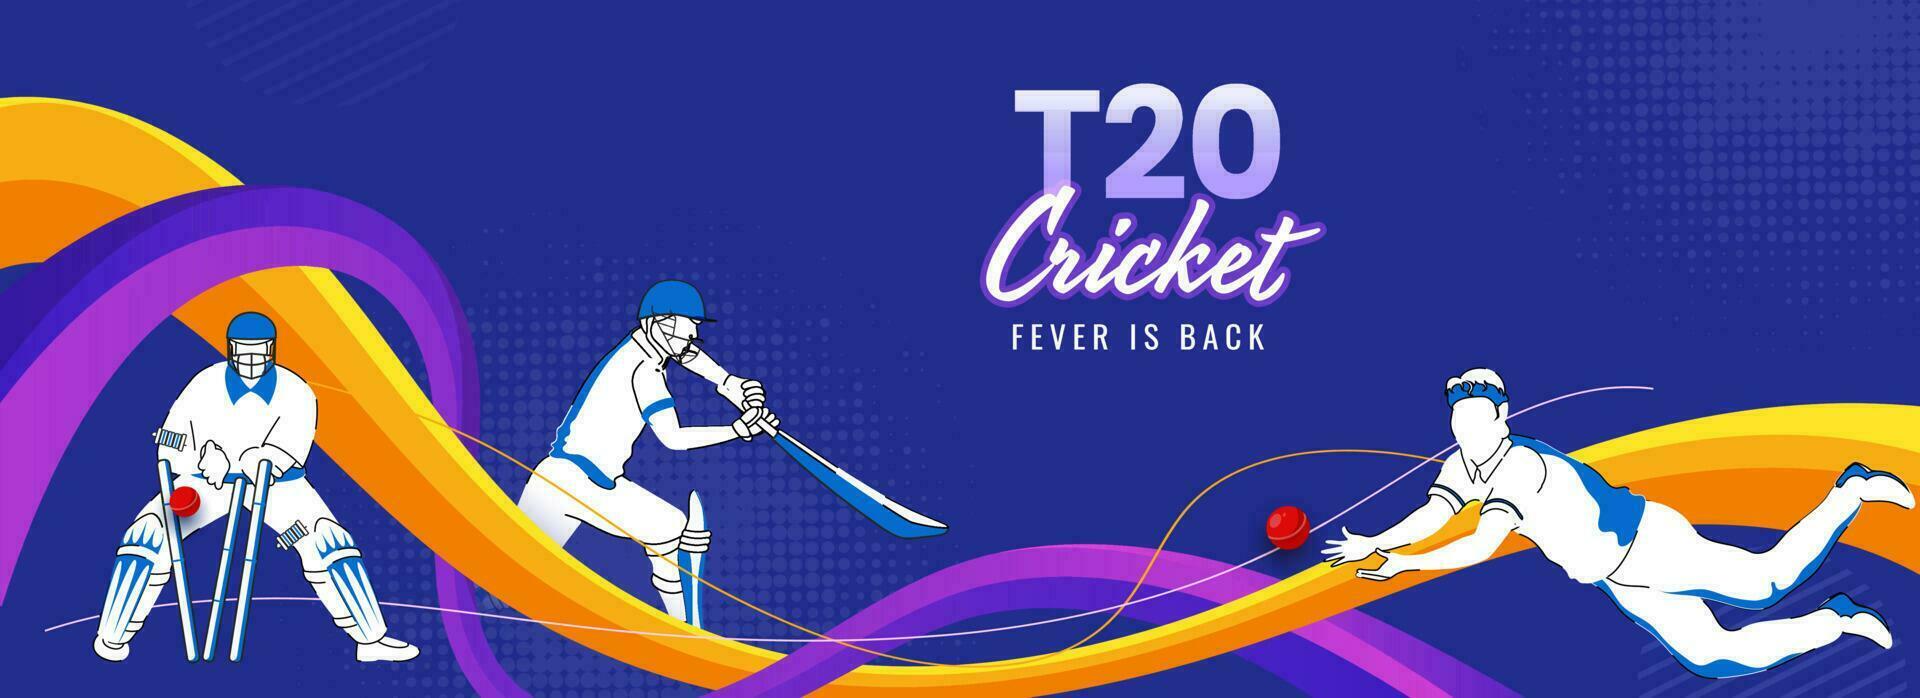 T20 Cricket Fever Is Back Concept With Cartoon Cricketer Players In Action Pose And Abstract Waves On Blue Halftone Background. vector